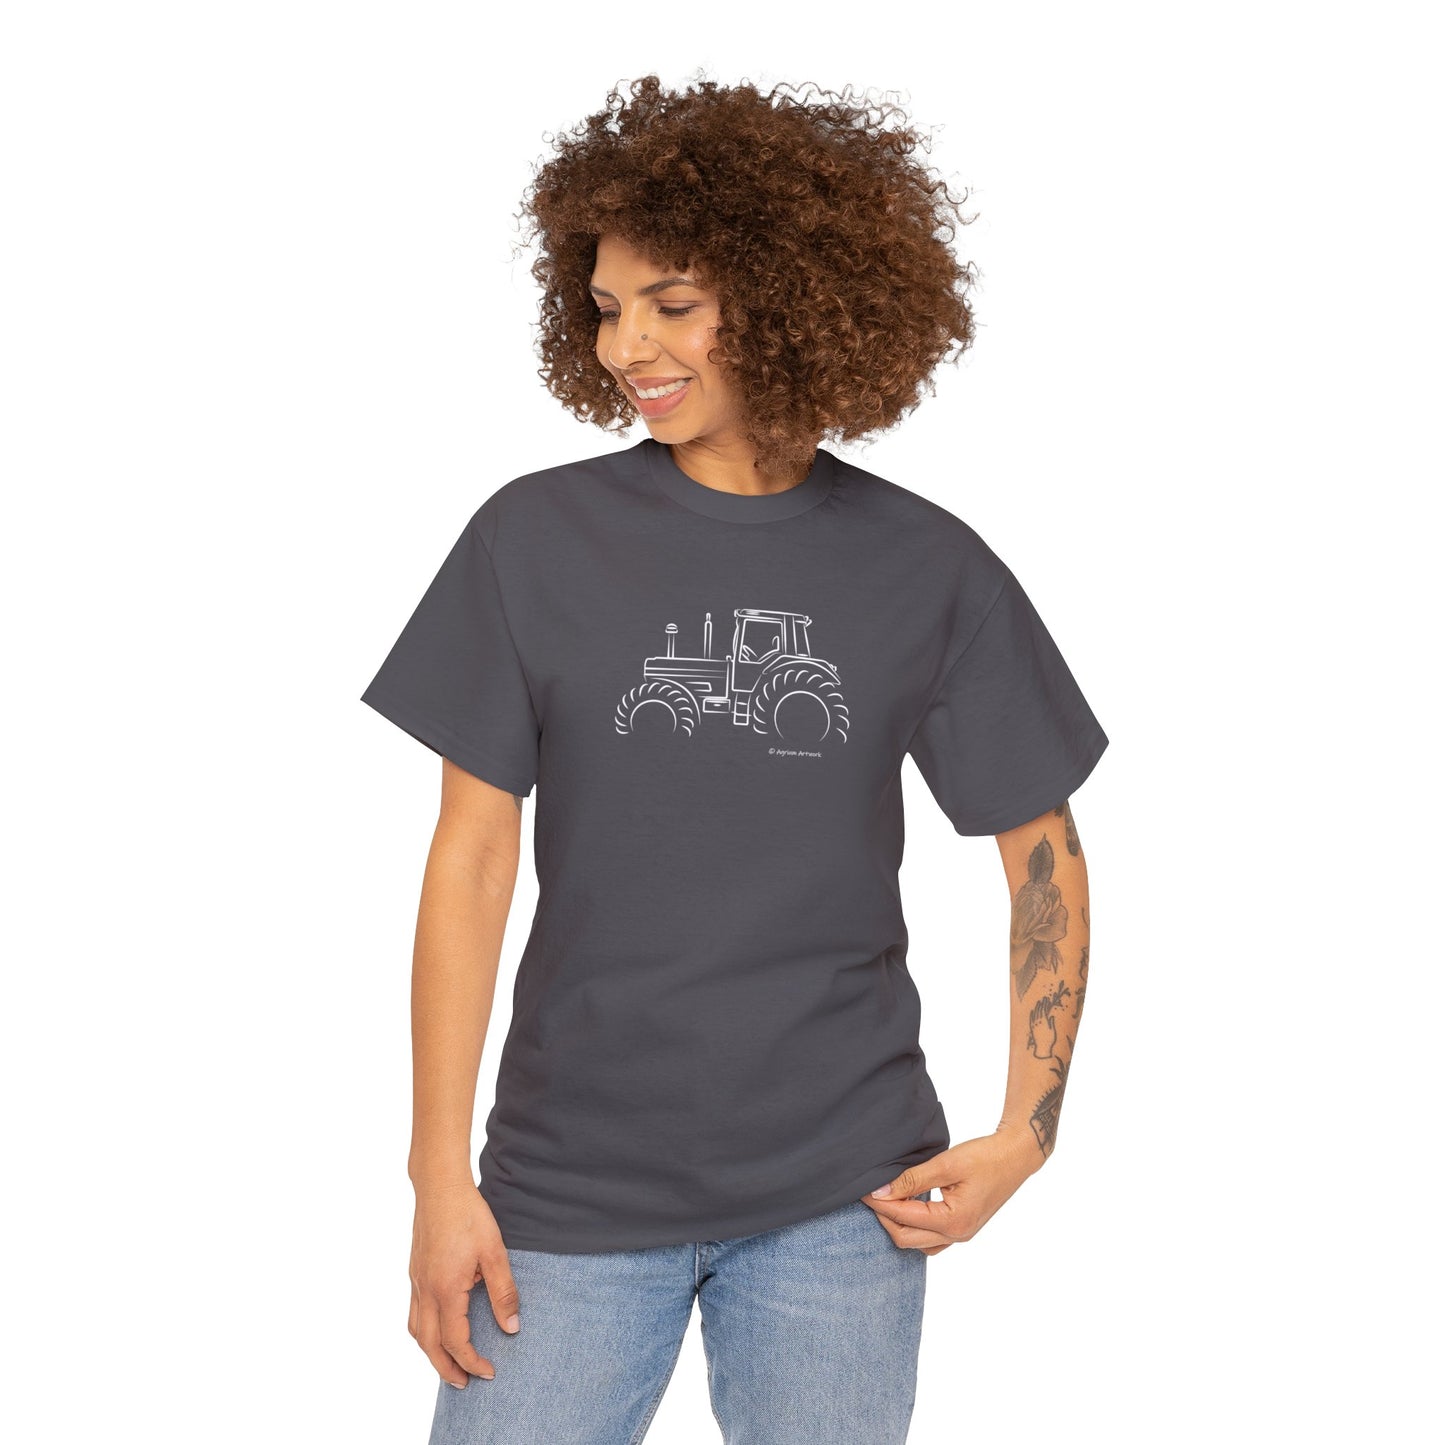 Case IH 1255XL Tractor Highlights - Adult T-Shirt